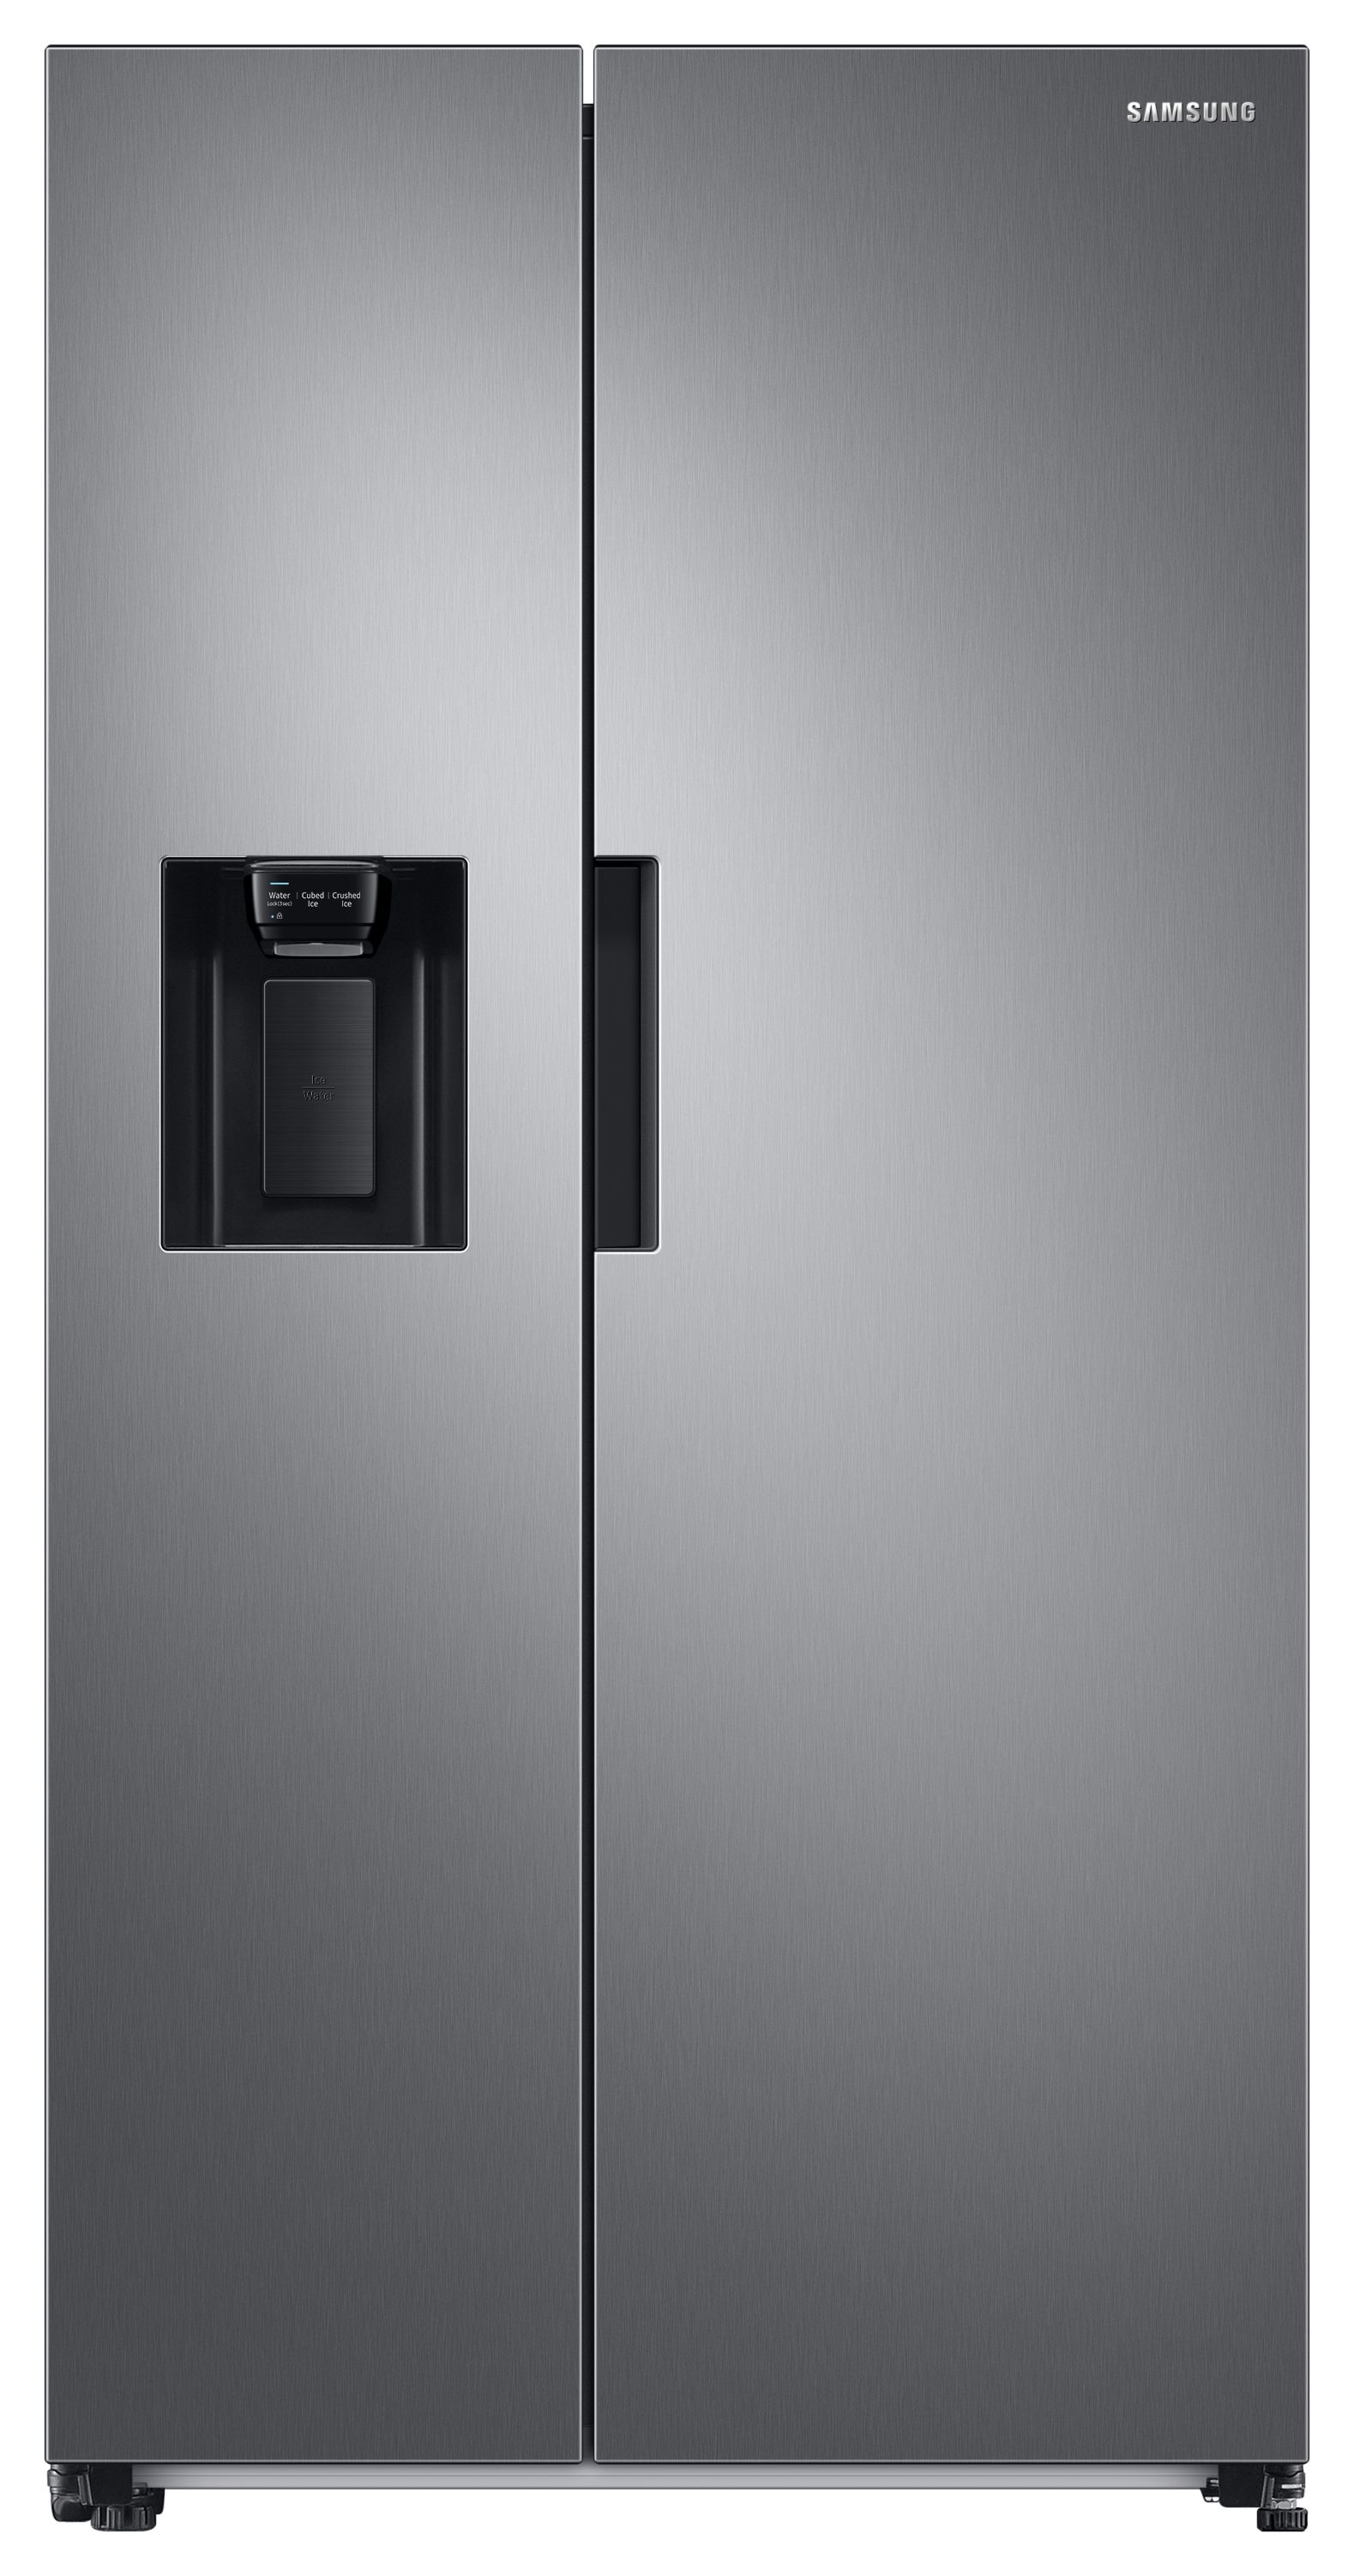 Image of Samsung RS67A8810S9/EU Water & Ice Dispenser F-Rated American Fridge Freezer - Stainless Steel